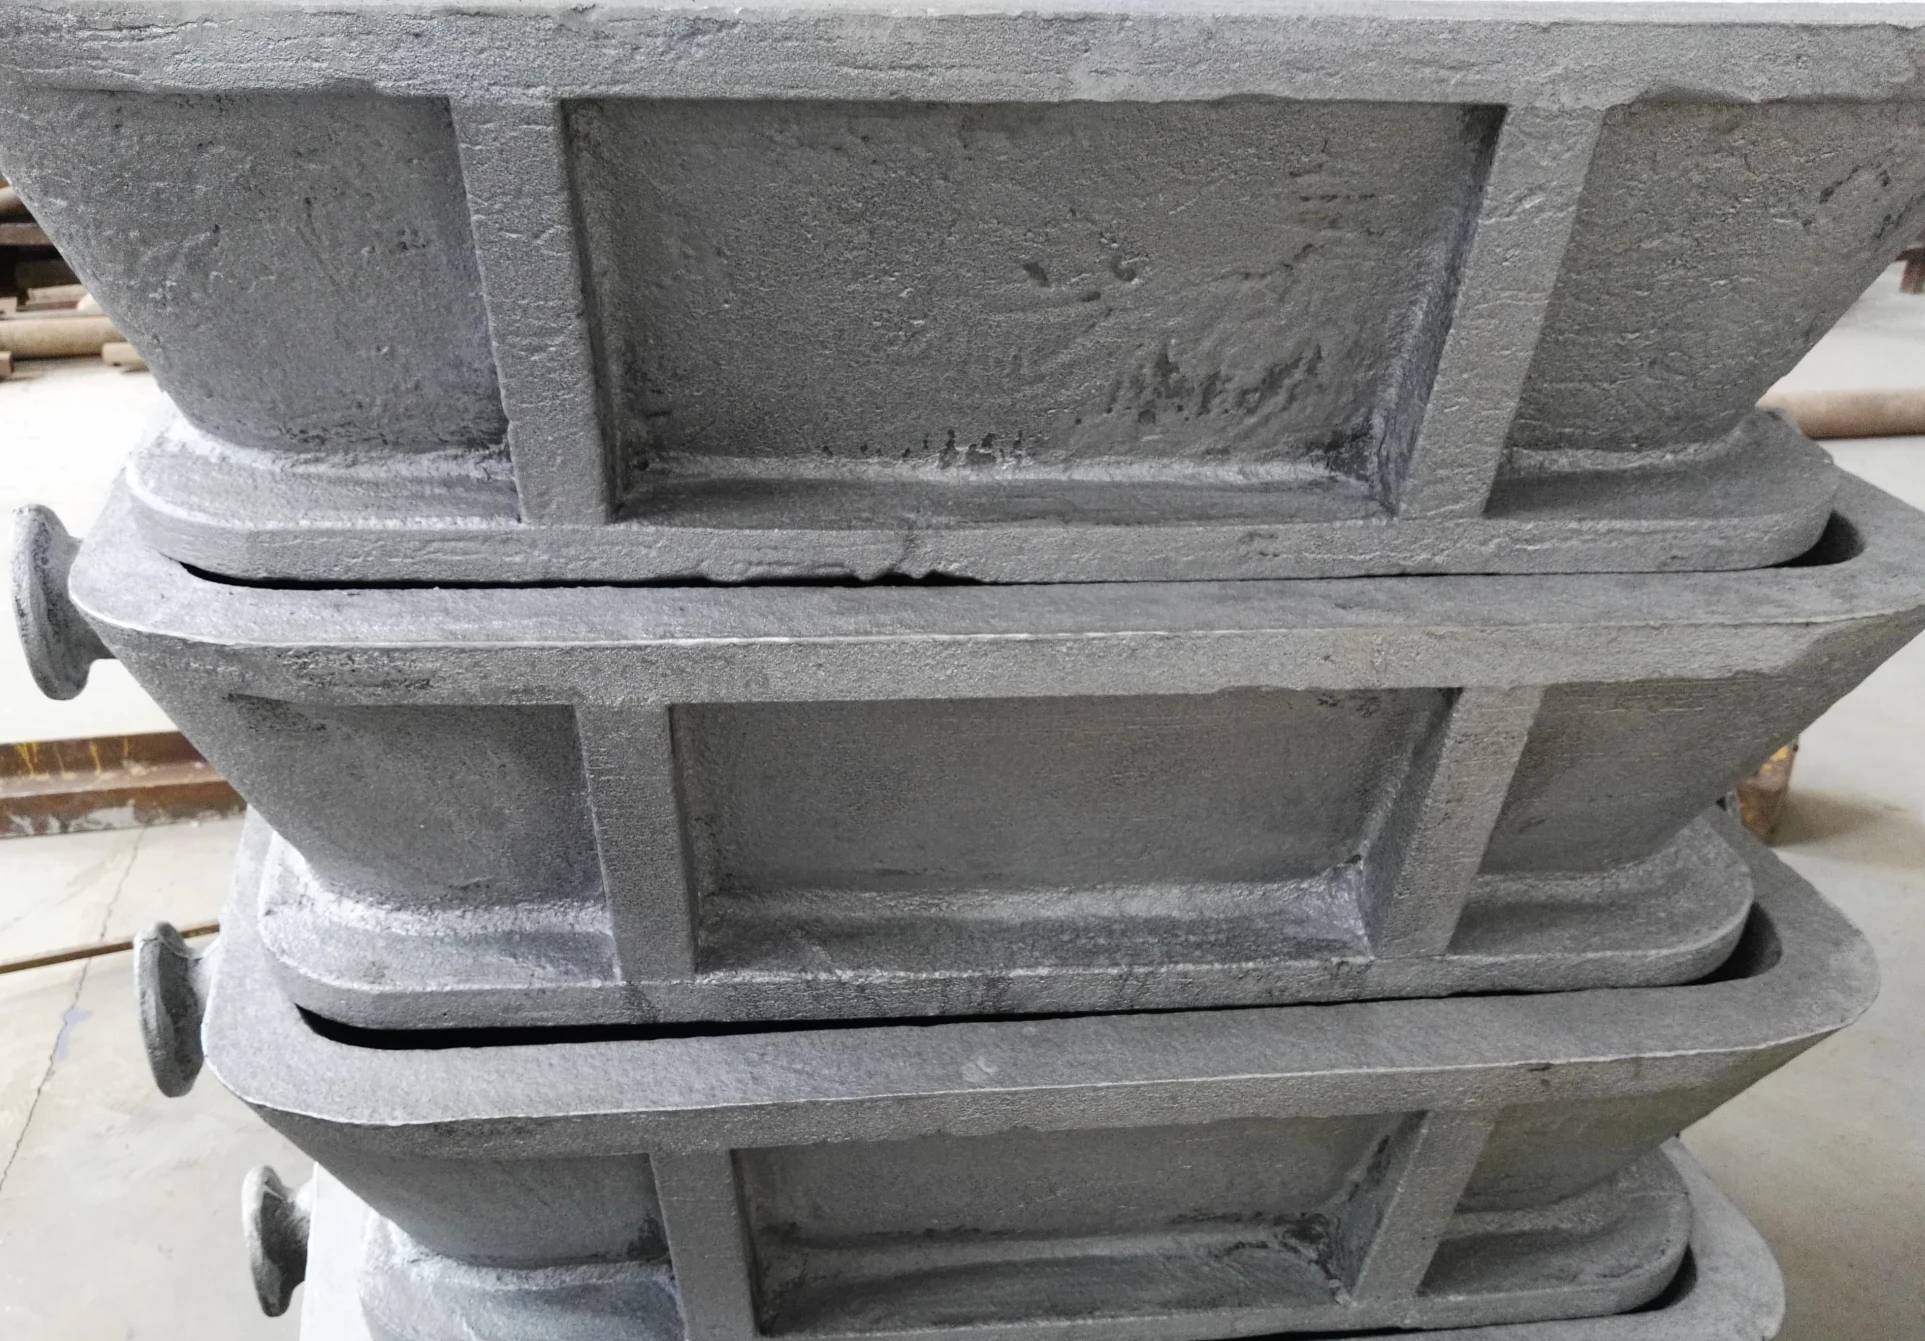 China zinc casting molds customized ingot mold other metal & metallurgy  machinery suppliers, manufacturers - Lufeng Machinery factory